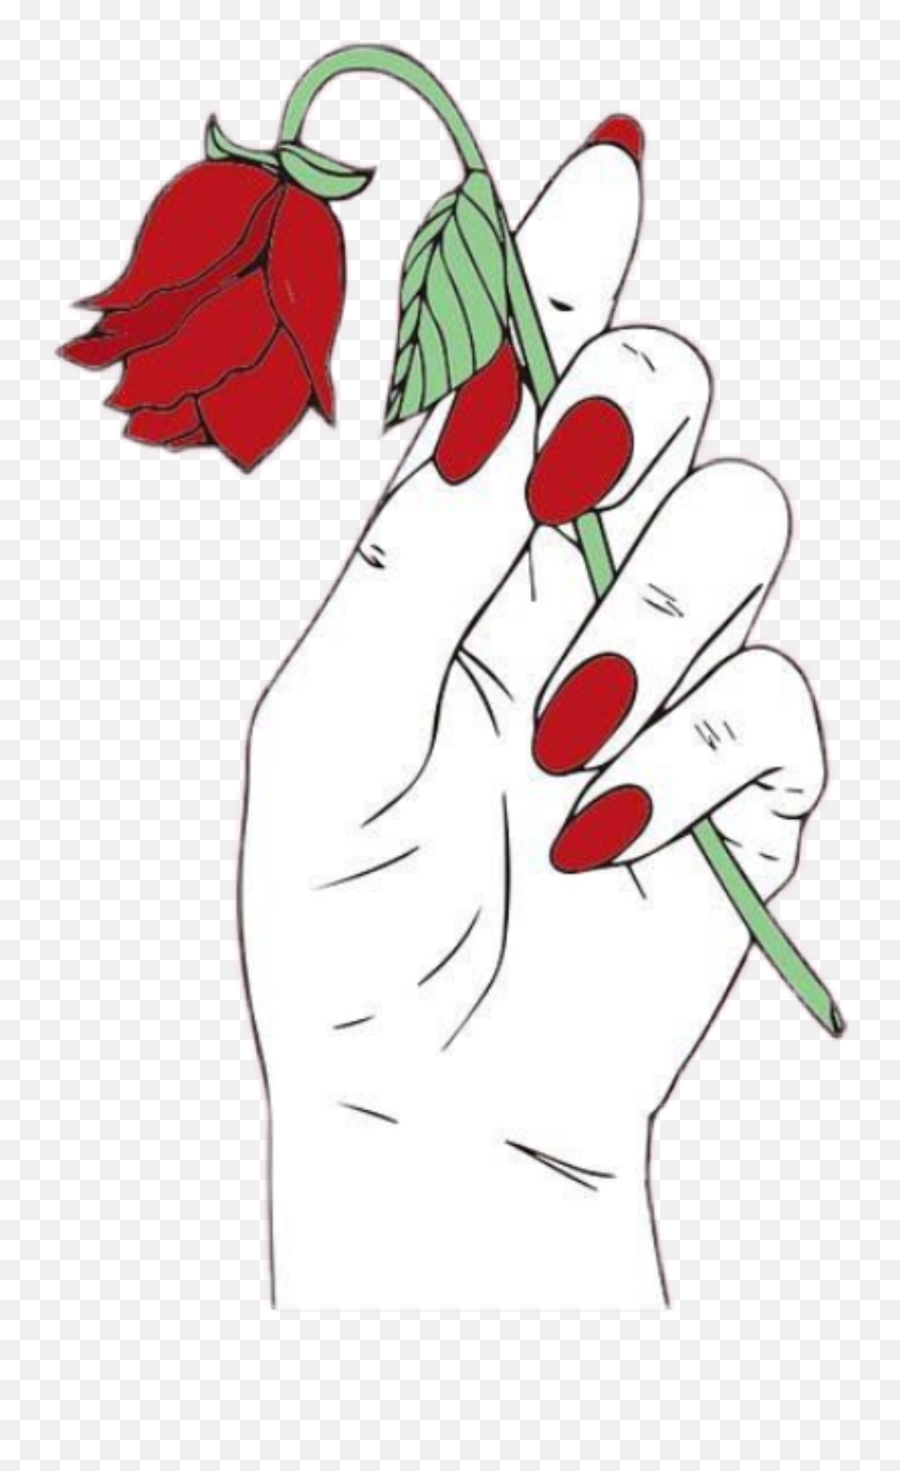 Fingers And Nails Sticker Challenge On Picsart - Guest House Emoji,Hold My Flower Emoticon Tumblr